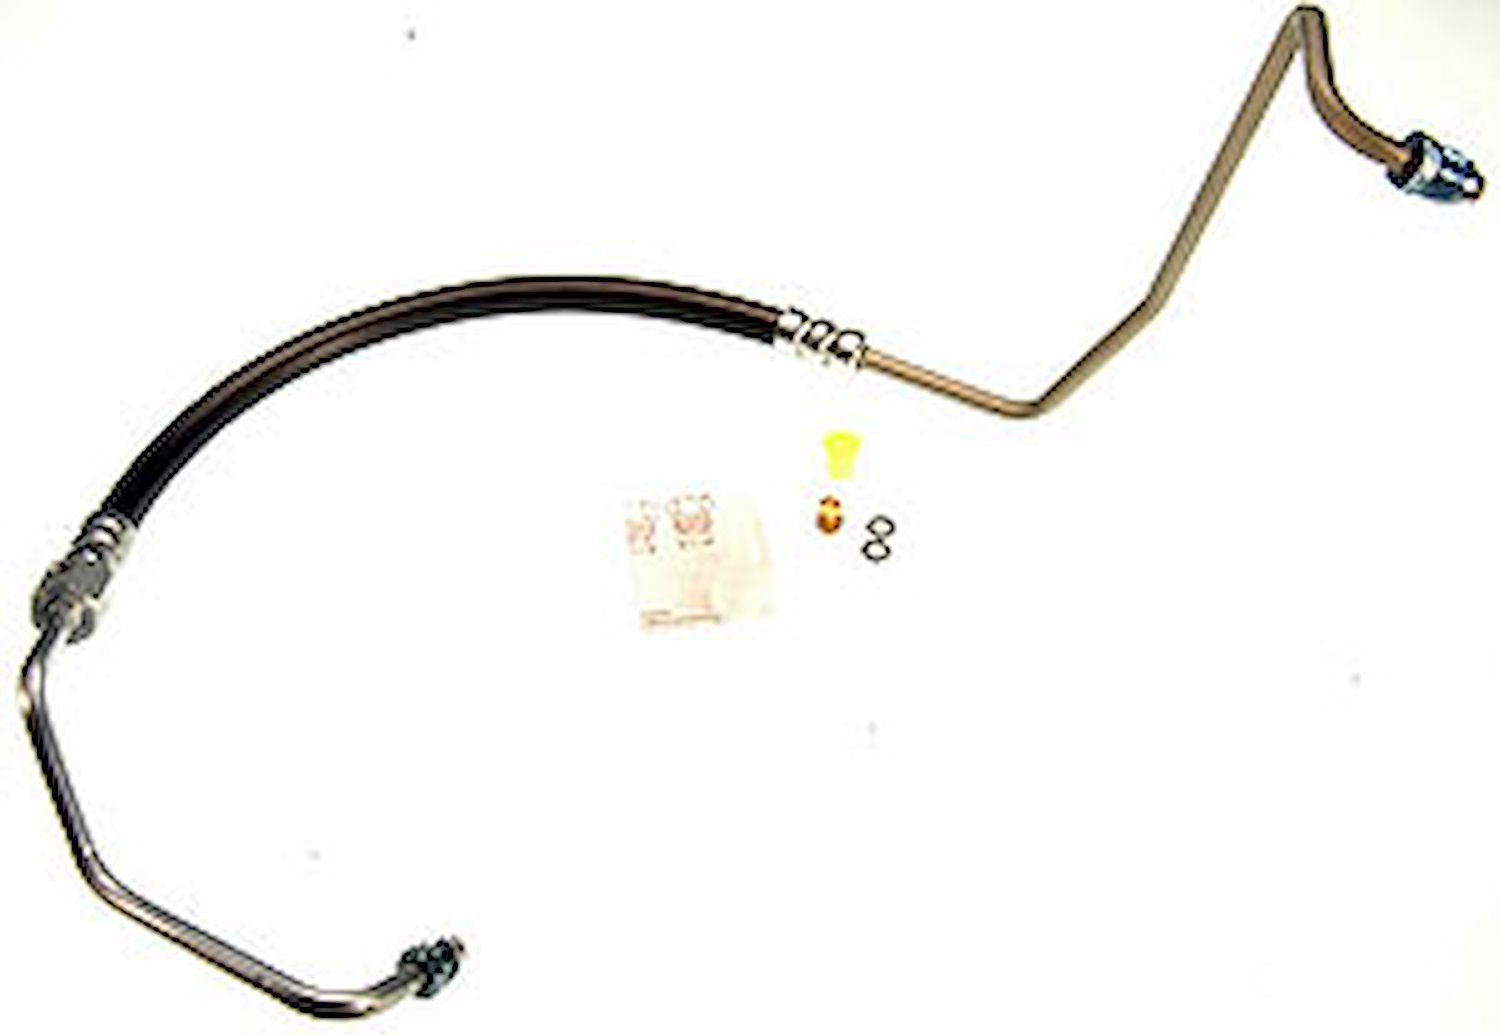 Power Steering Pressure Line Assembly 16mm Male O-Ring x 18mm Male O-Ring x 44-1/8" w/ Switch Port